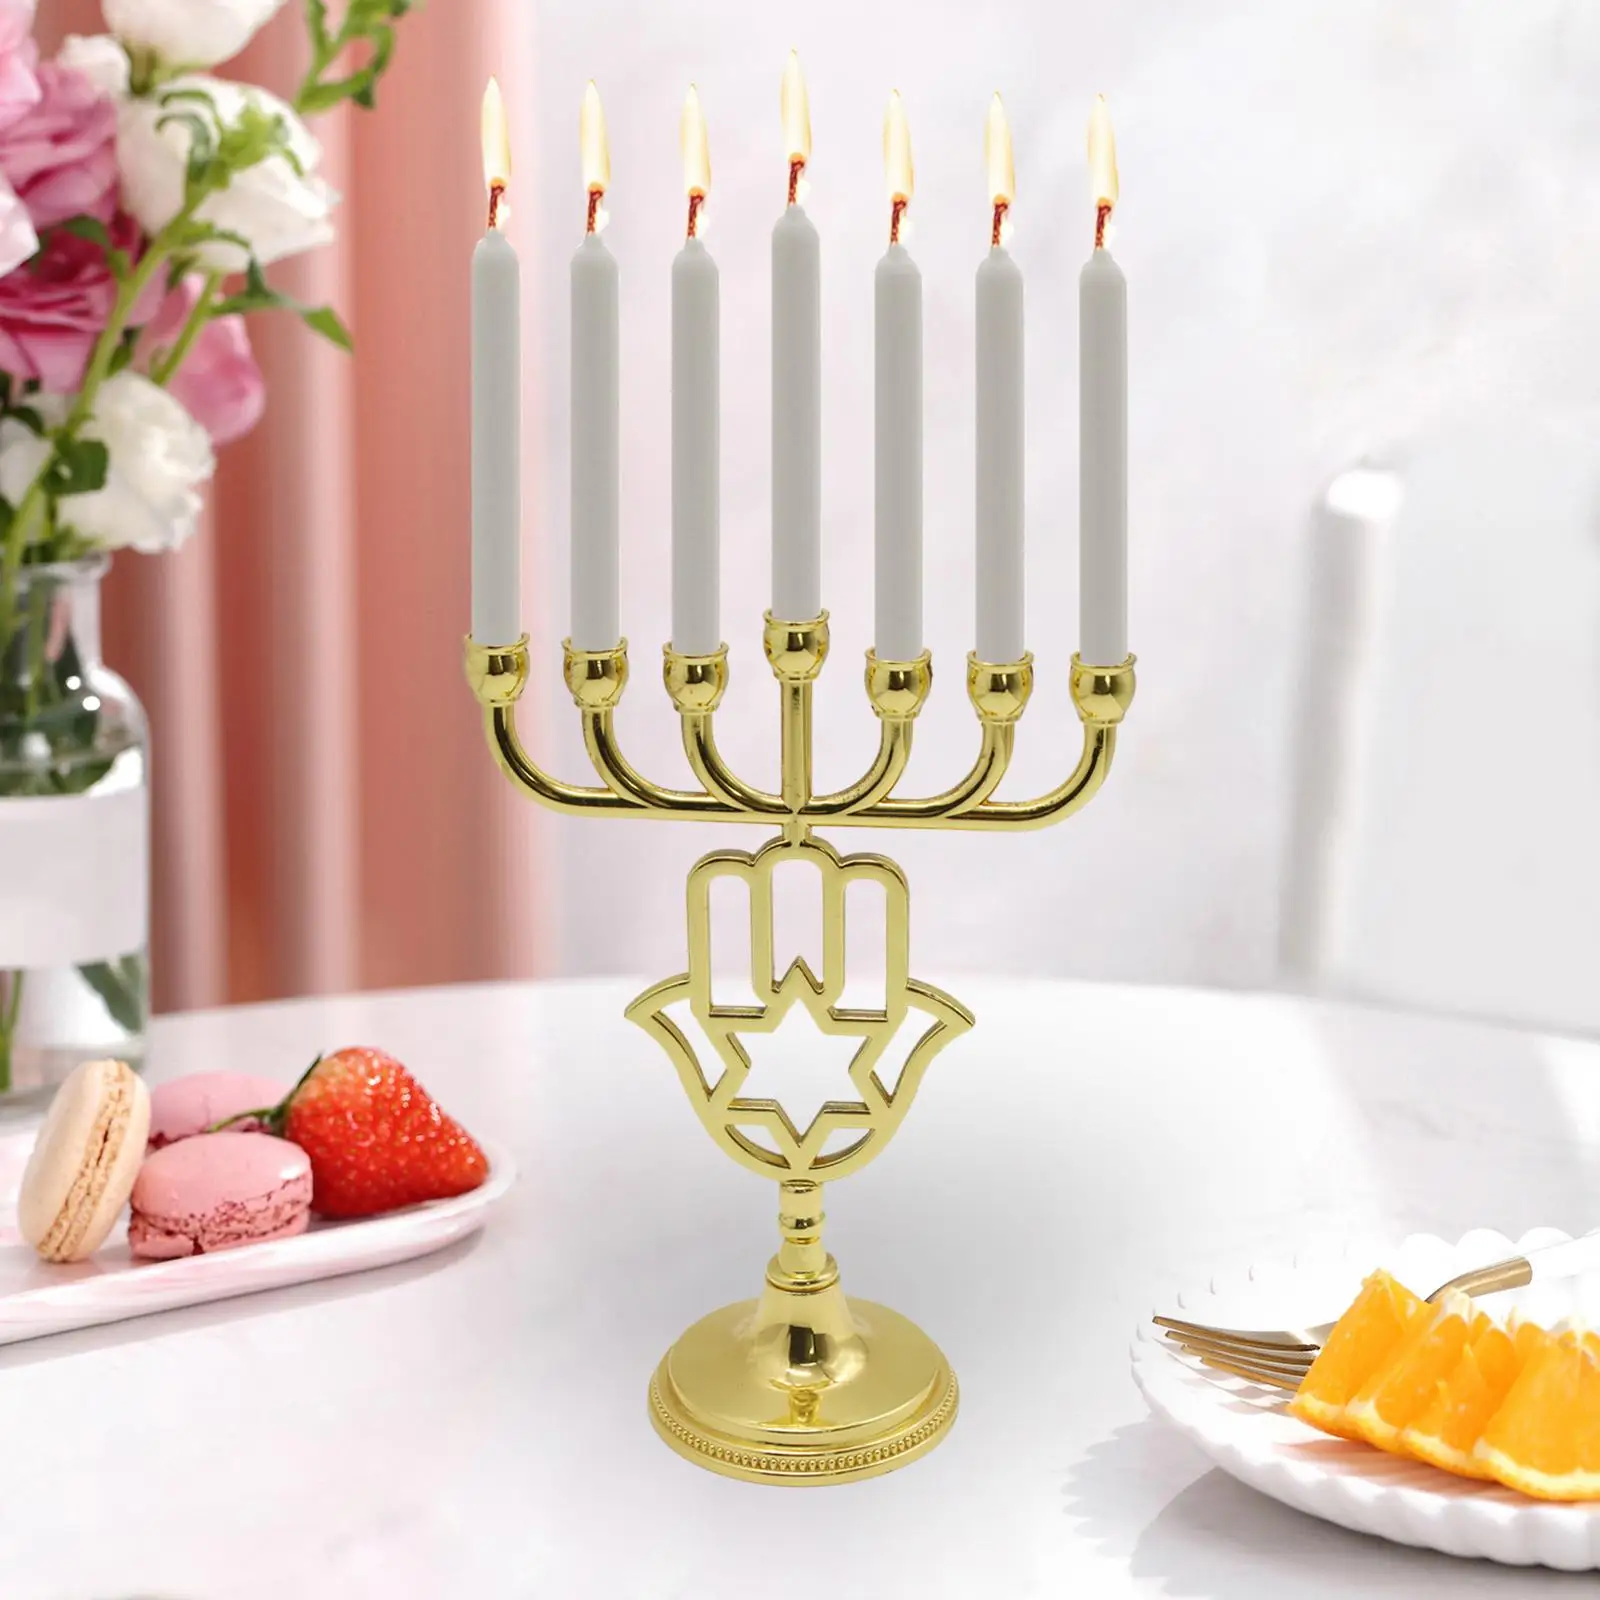 7 Branched Candle Holder Table Centerpieces Hanukkah Menorah Ornament Candle Stands for Party New Year Festival Event Decoration